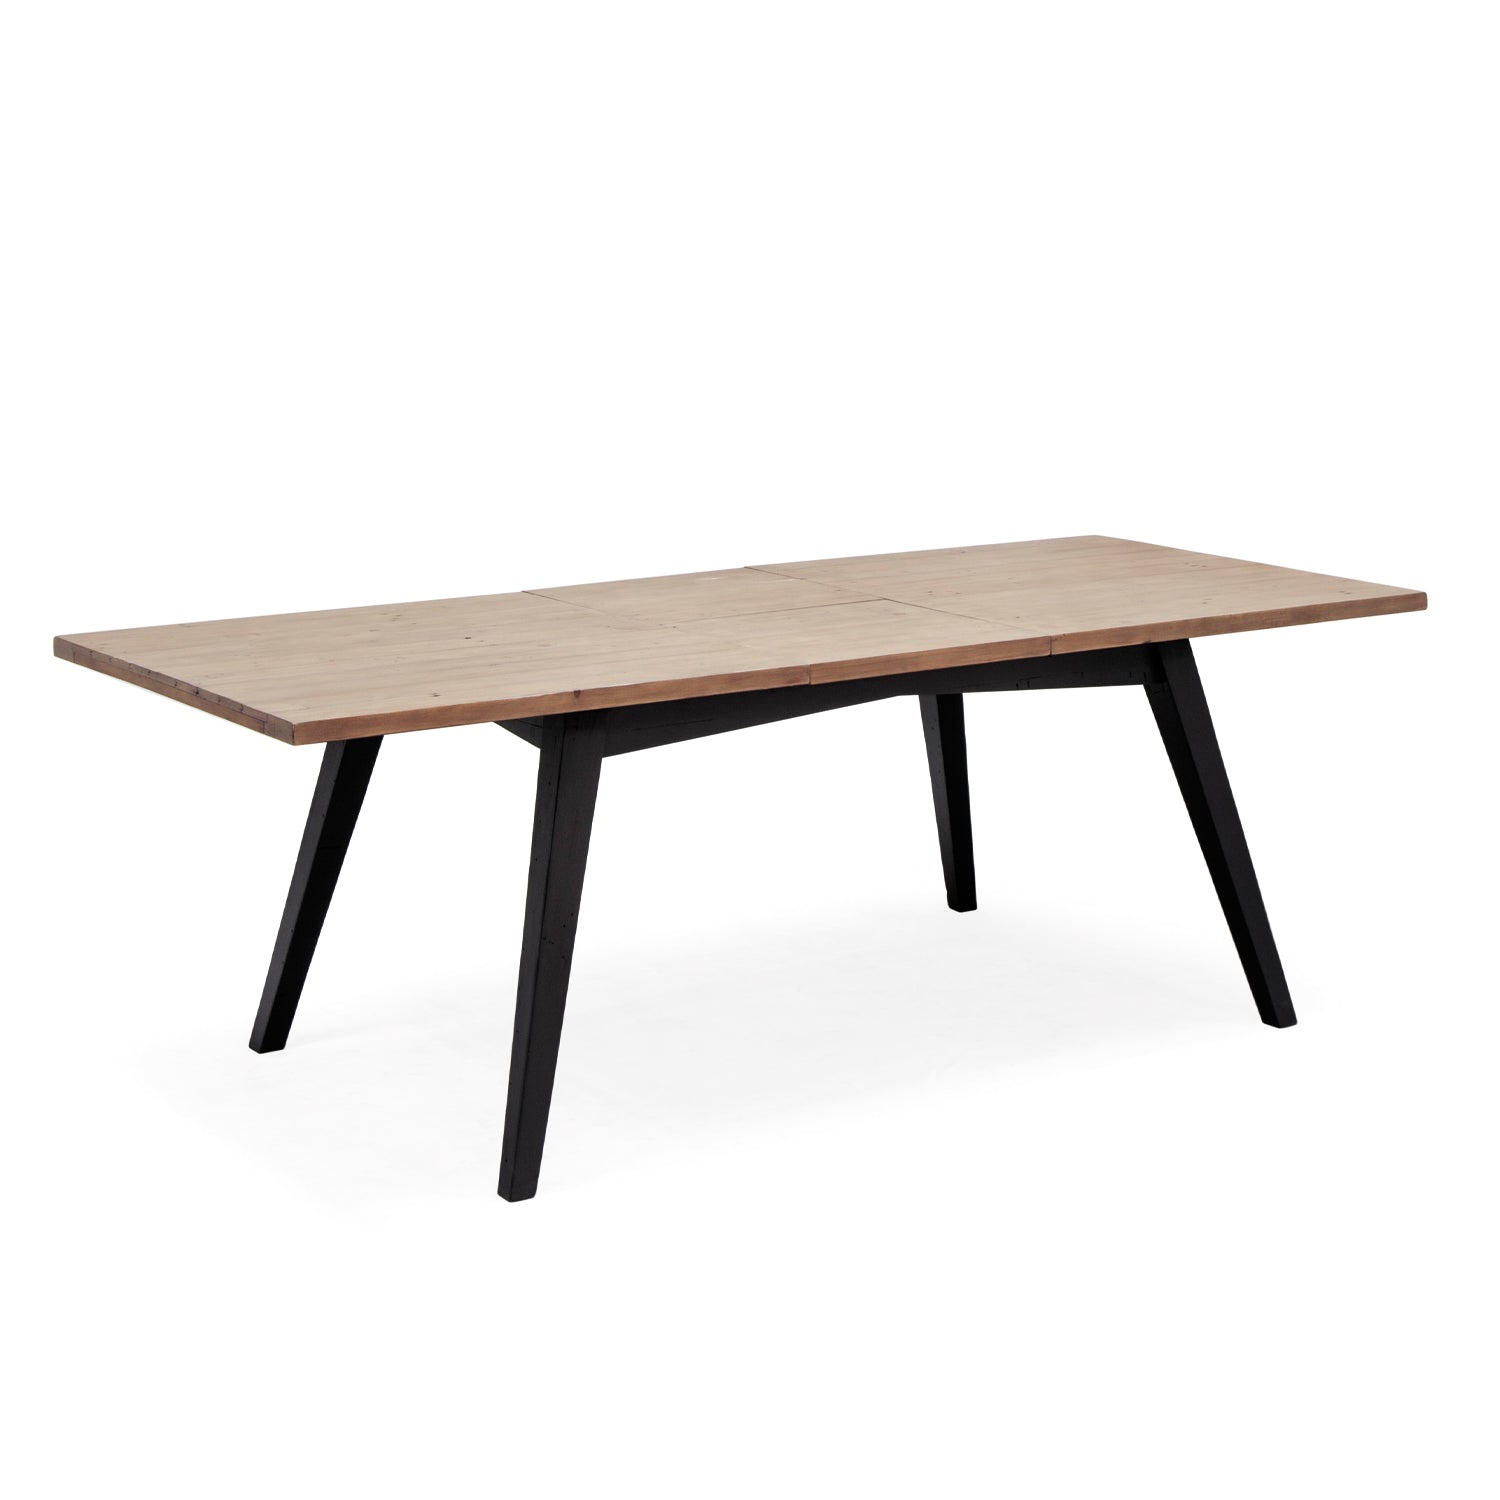 Lawrence Hill - Extending Dining Table